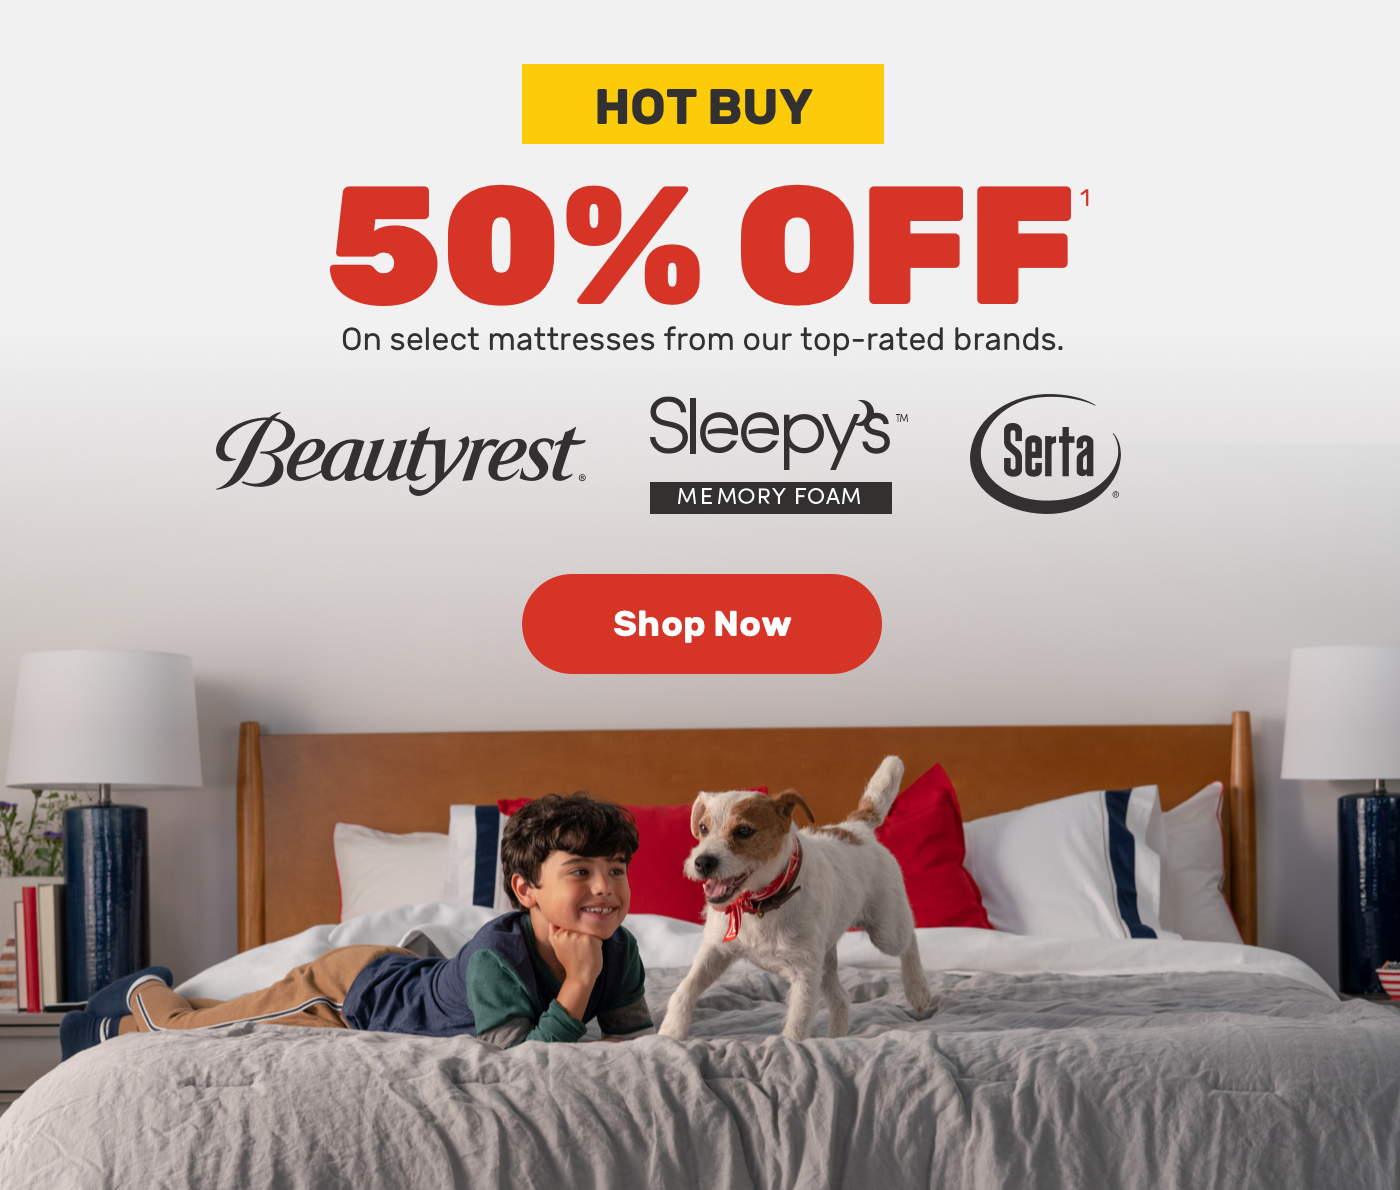 Hot Buy 50% off on select mattresses from our top-rated brands.Shop Now TWIN PRICE.save upto $500 - Free adjustable base when you spend $699